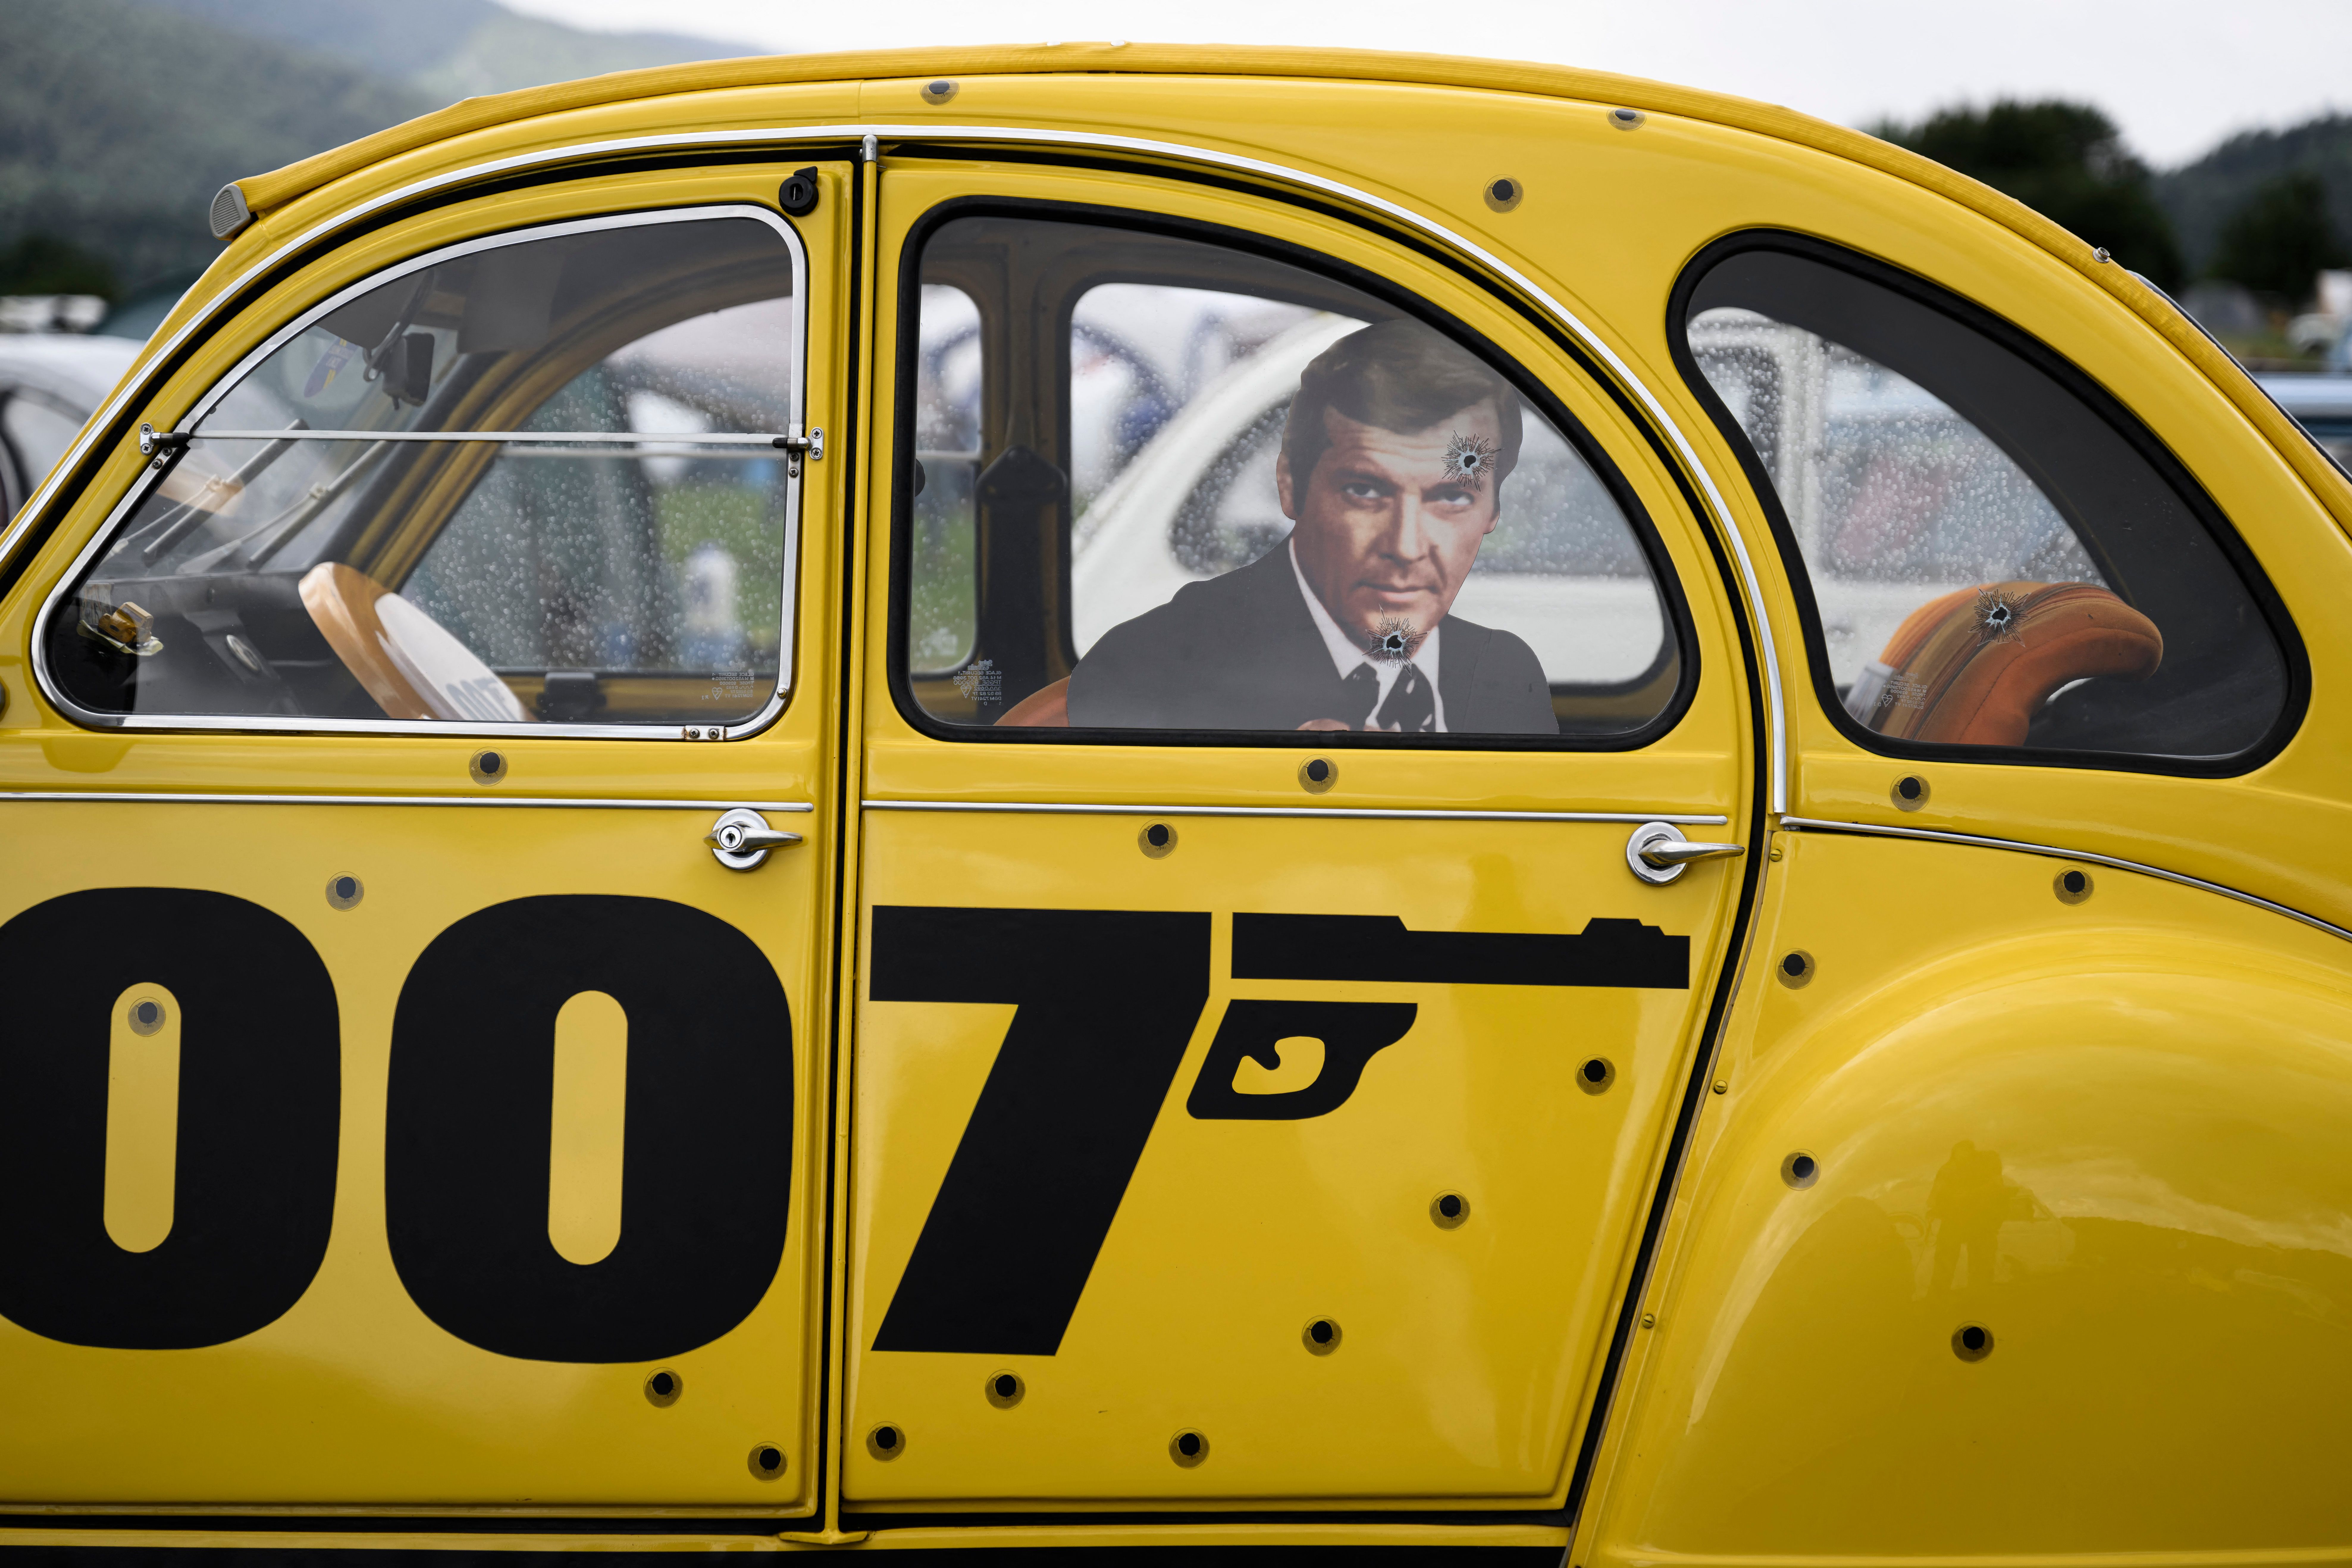 A car adorned with fictional cinema character "James Bond" themed decoration in Delemont, northern Switzerland on July 26, 2023. | Source: Getty Images